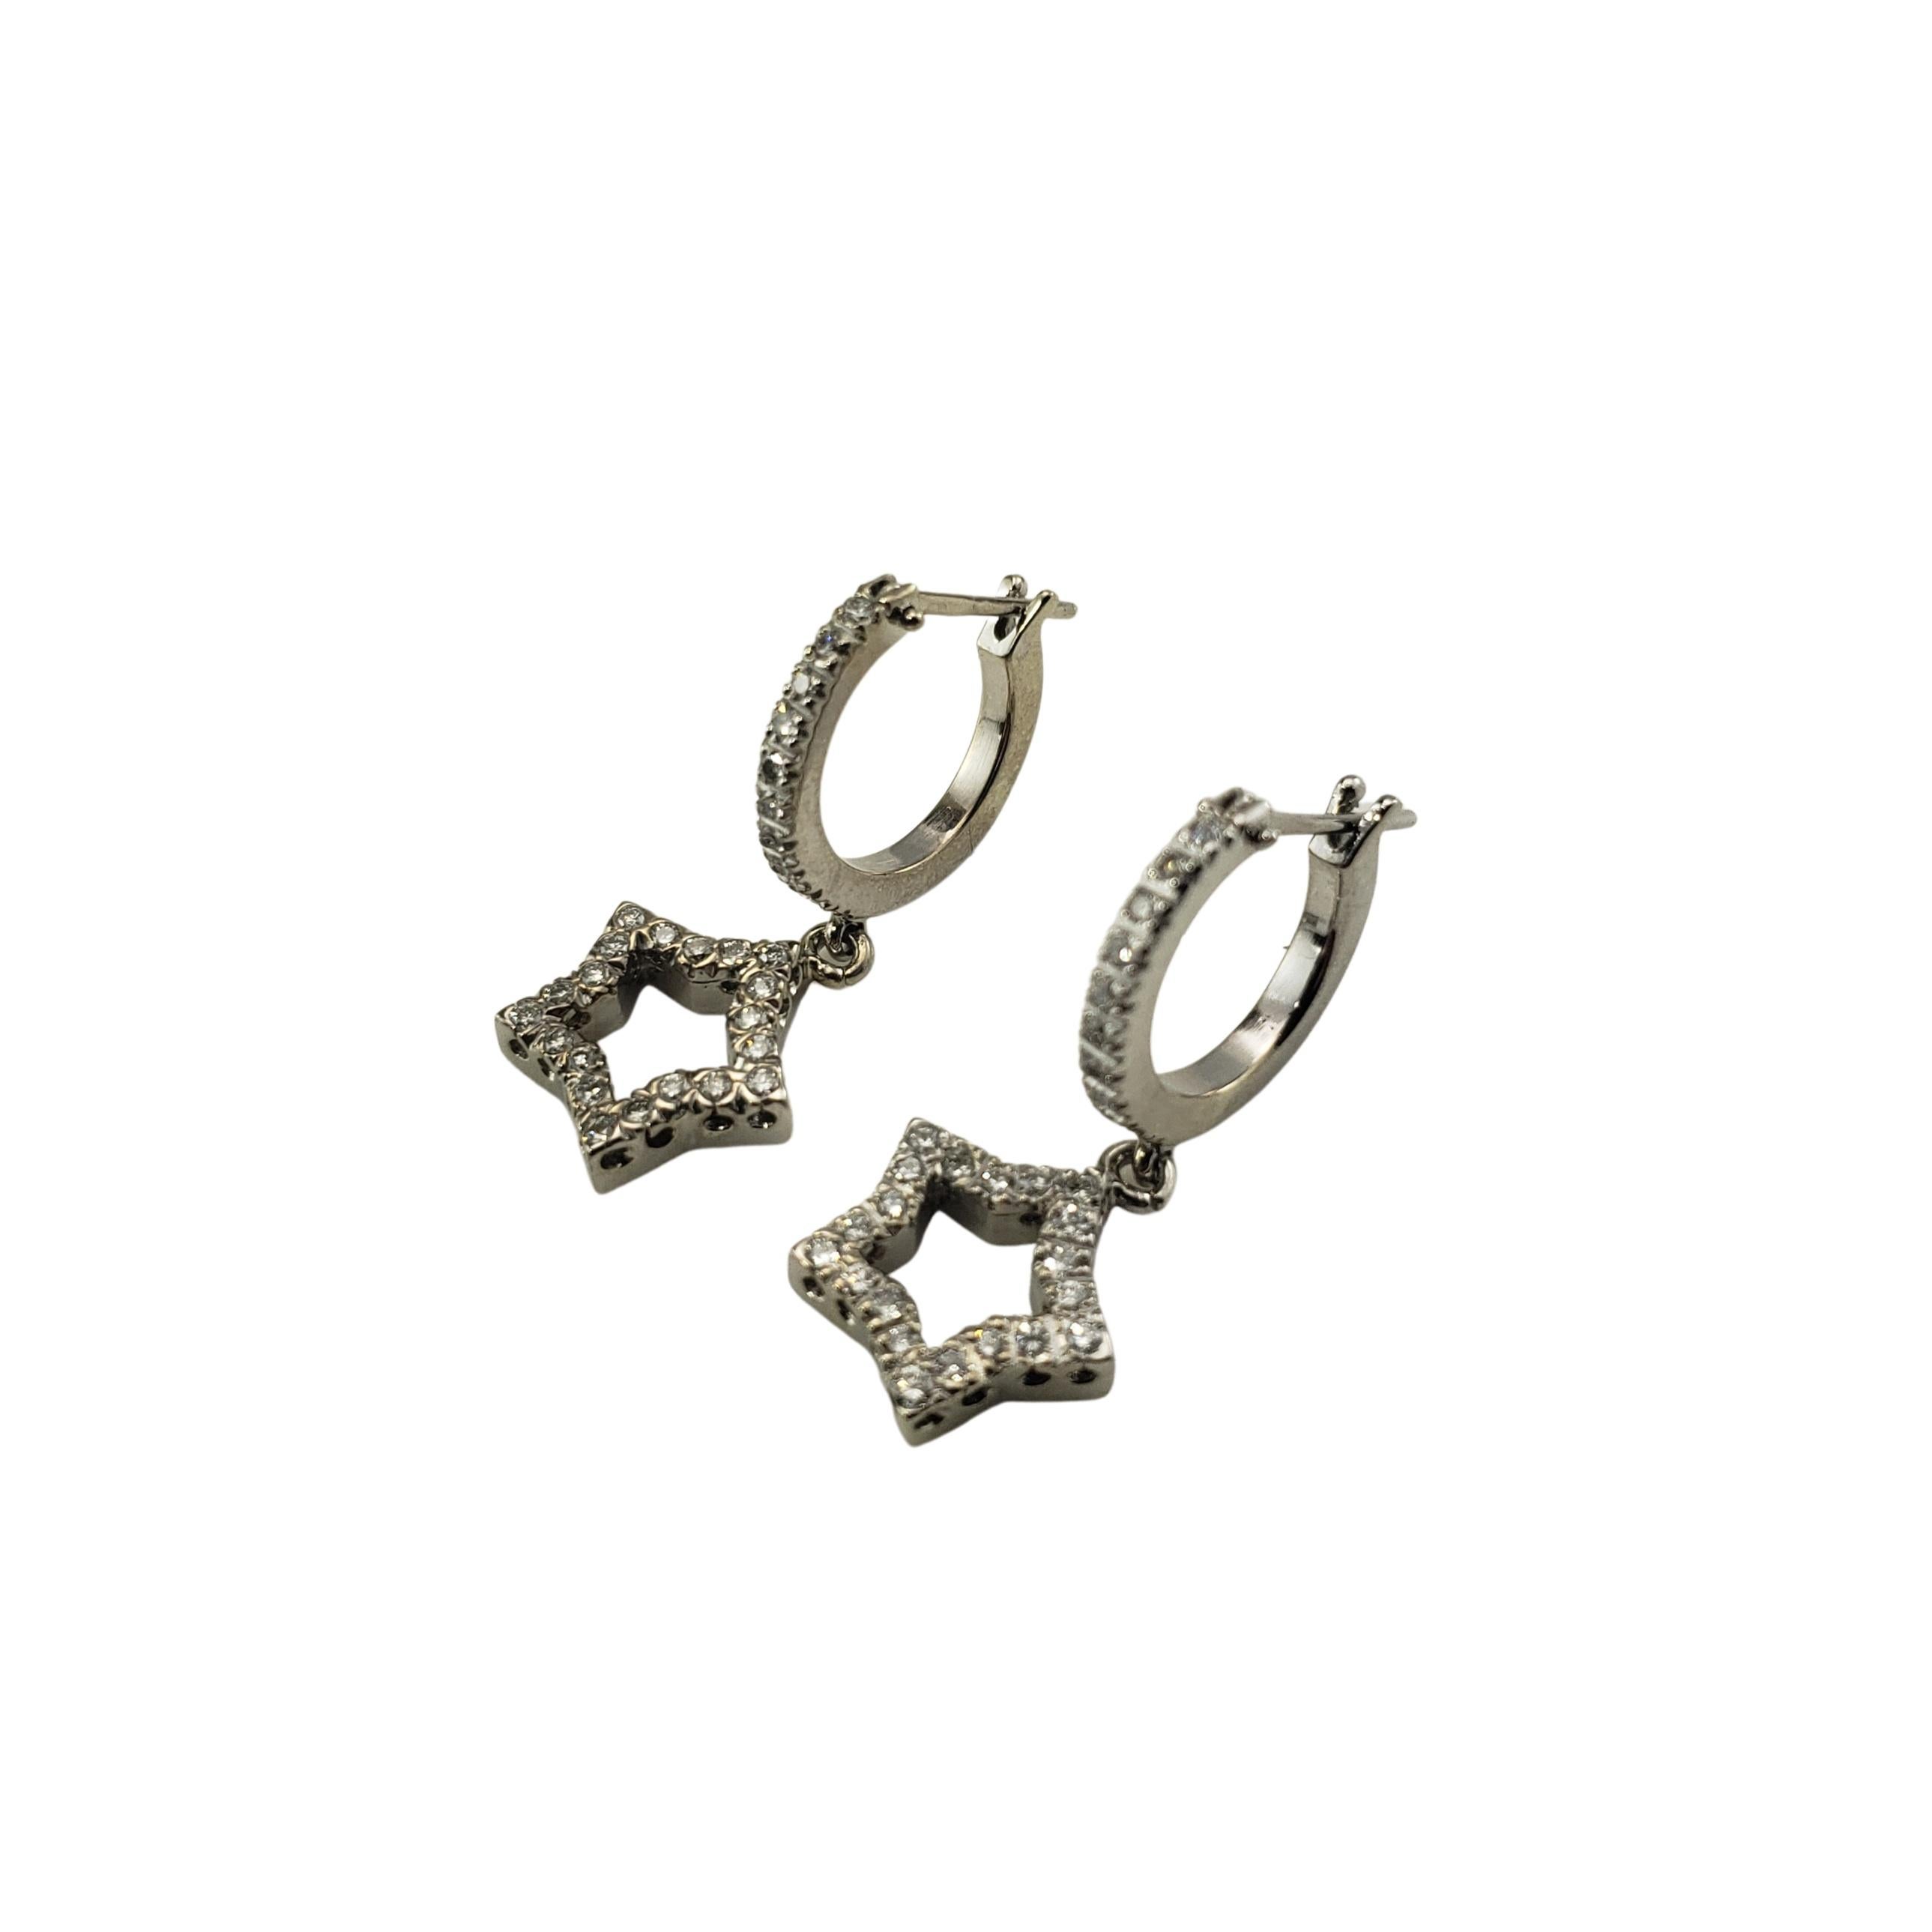 Vintage 14 Karat White Gold and Diamond Hoop and Star Earrings-

These sparkling hoop earrings with dangling stars each feature 30 round brilliant cut diamonds set in classic 14K white gold.

Approximate total diamond weight:  .60 ct.

Diamond